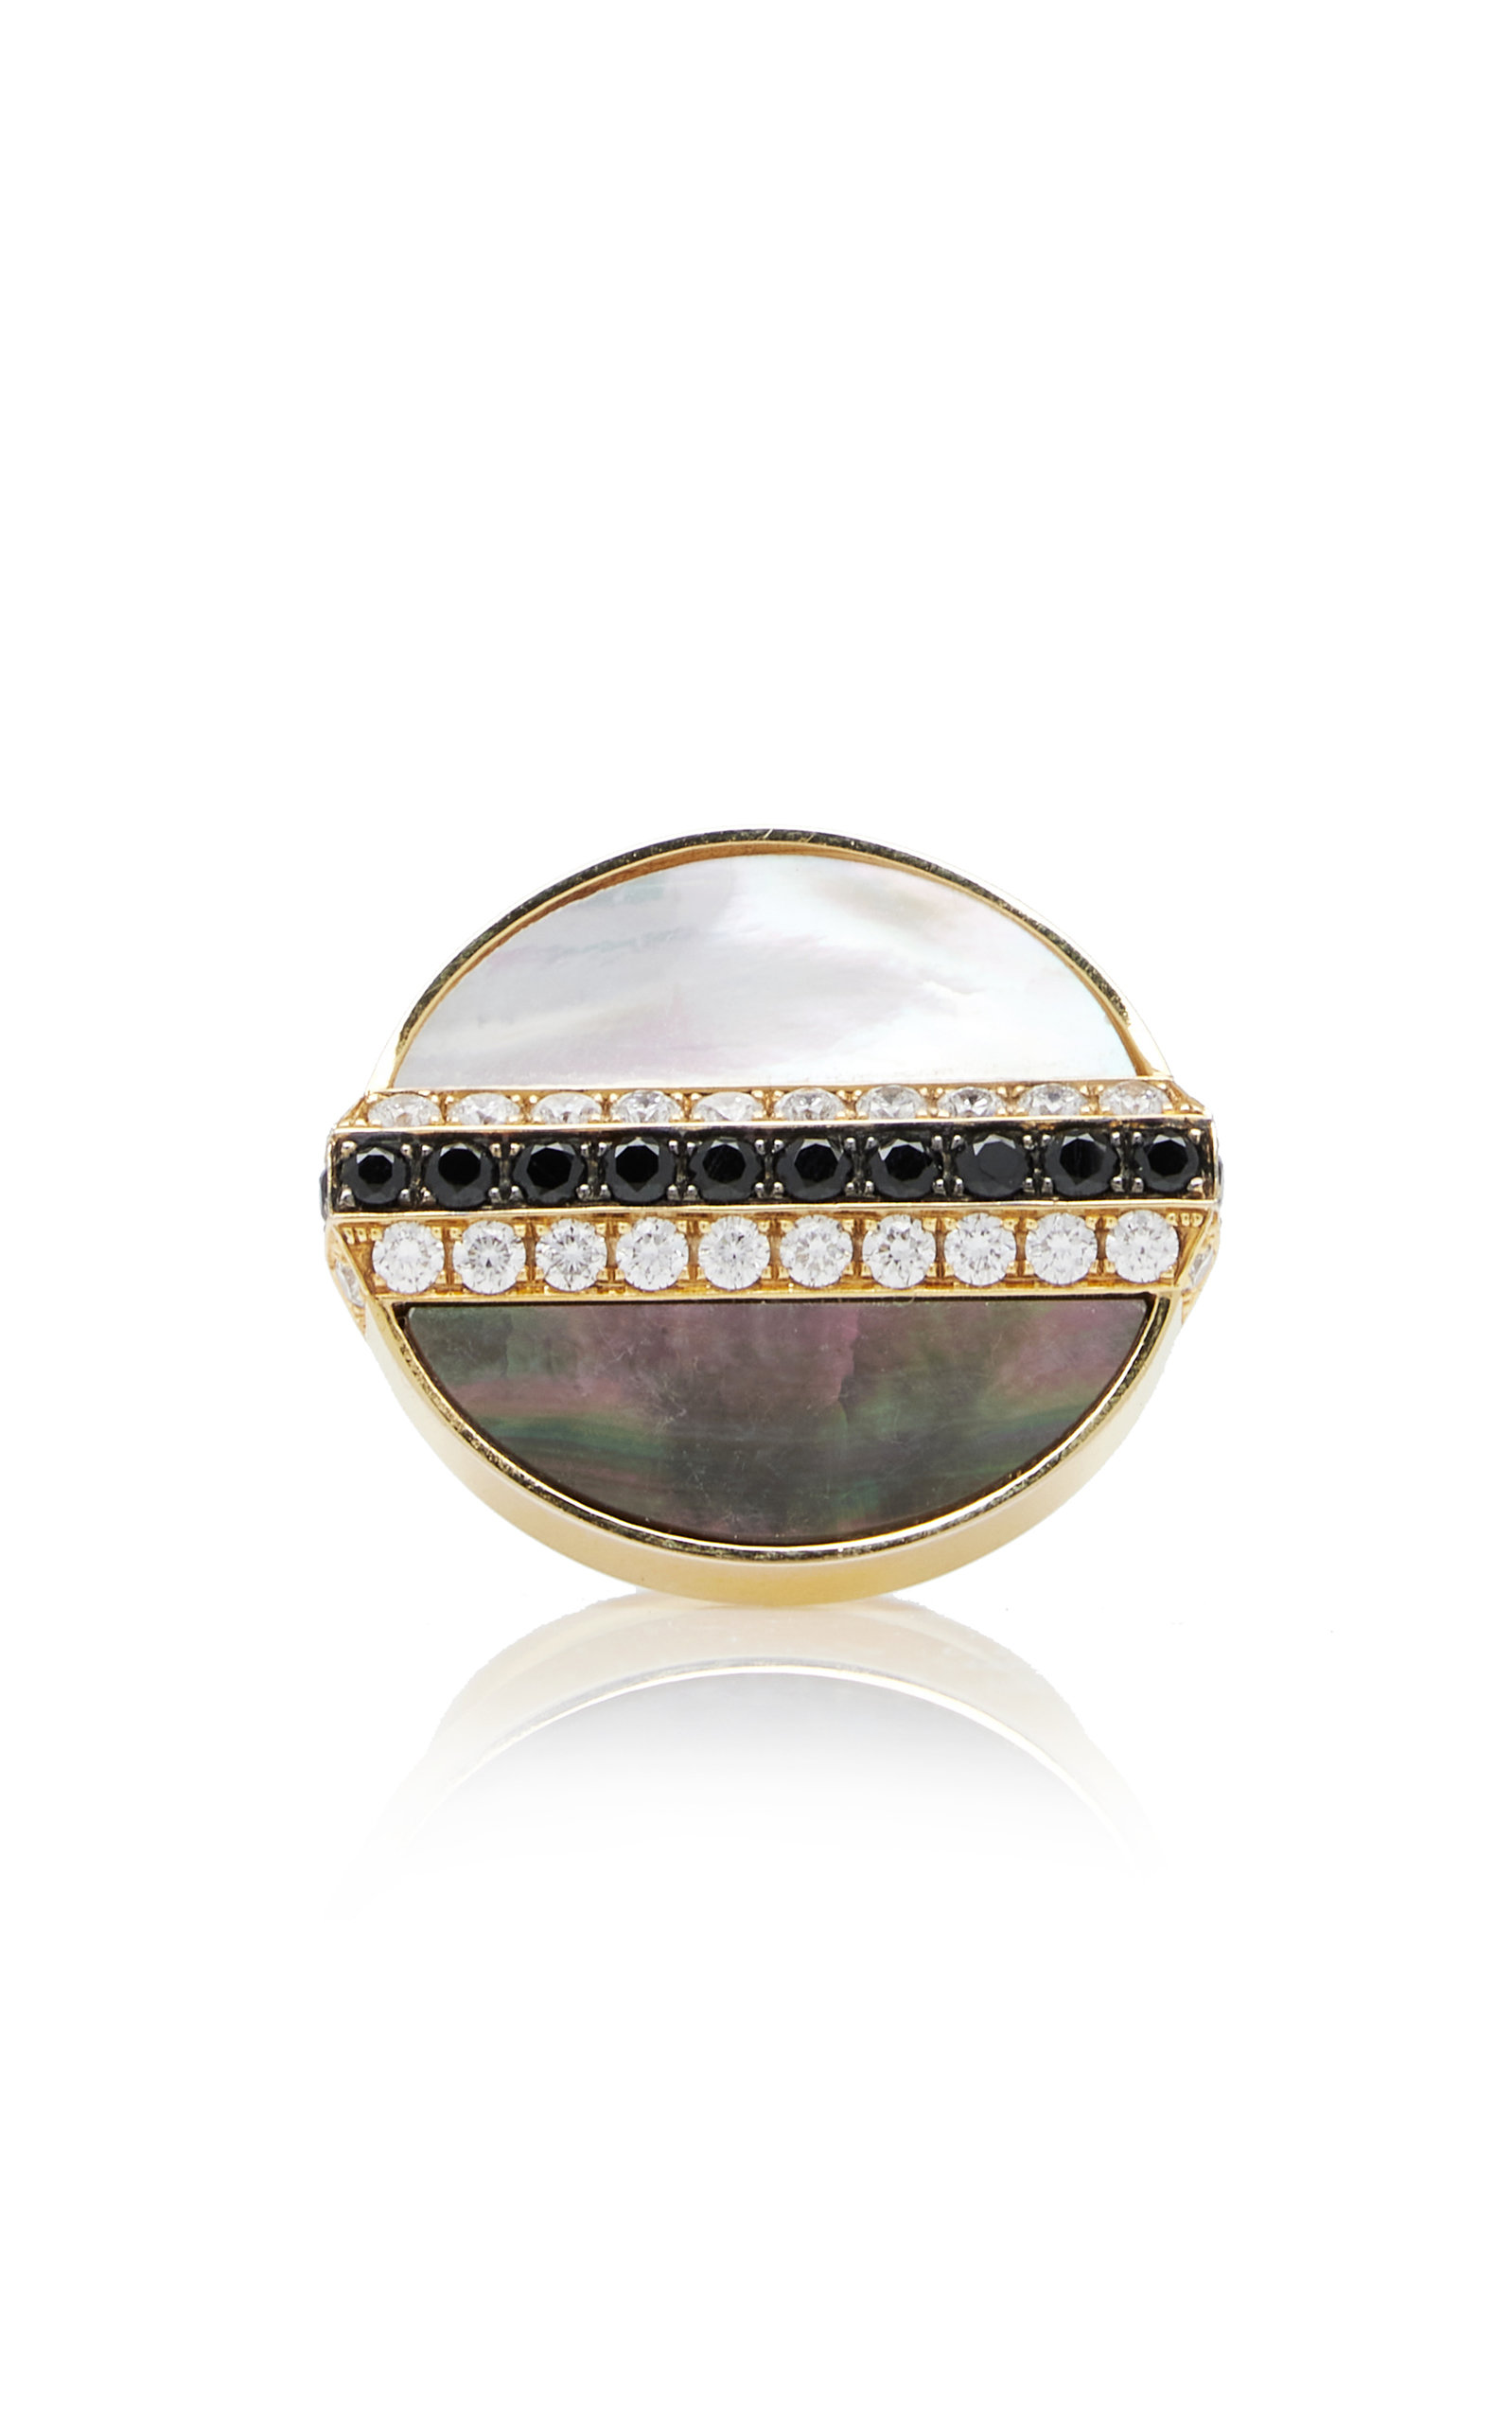 Danielle Marks Women's Luna 18k Yellow Gold Onyx; Mother-of-Pearl Ring